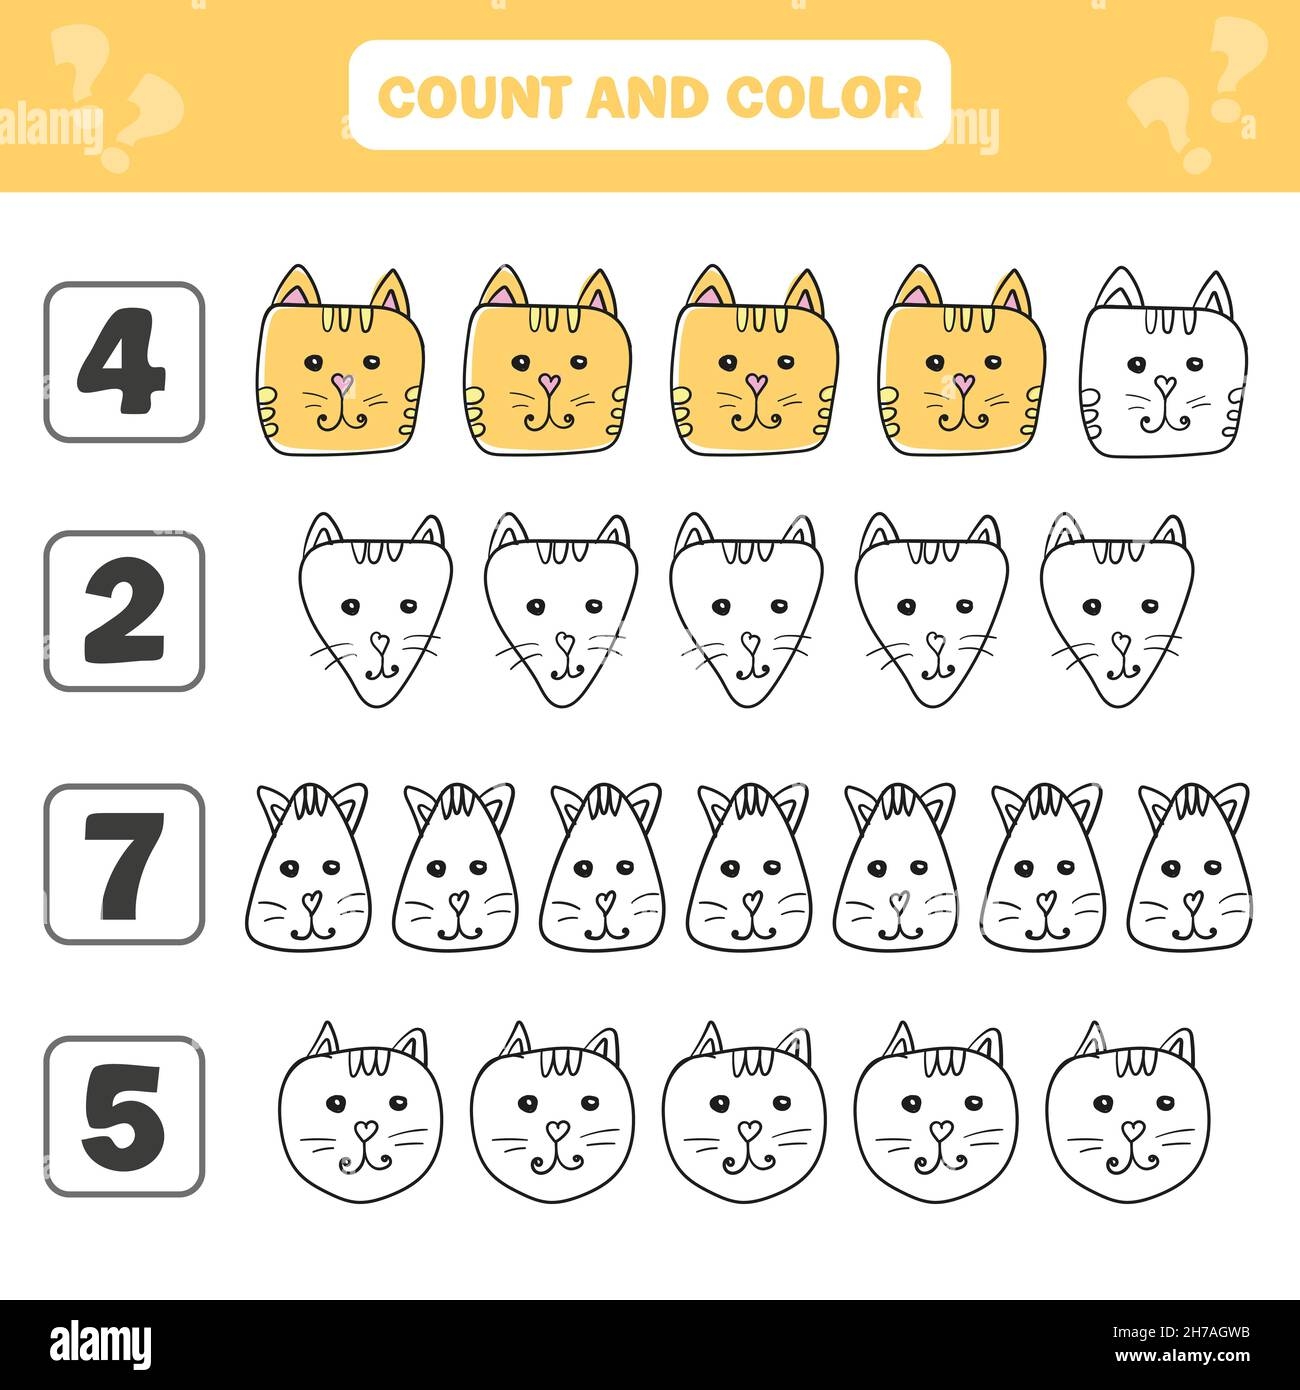 Count And Color Game For Preschool Children Cute Cats Worksheet For The Development Of Mathematical Abilities Coloring Book For Kids Stock Vector Image Art Alamy